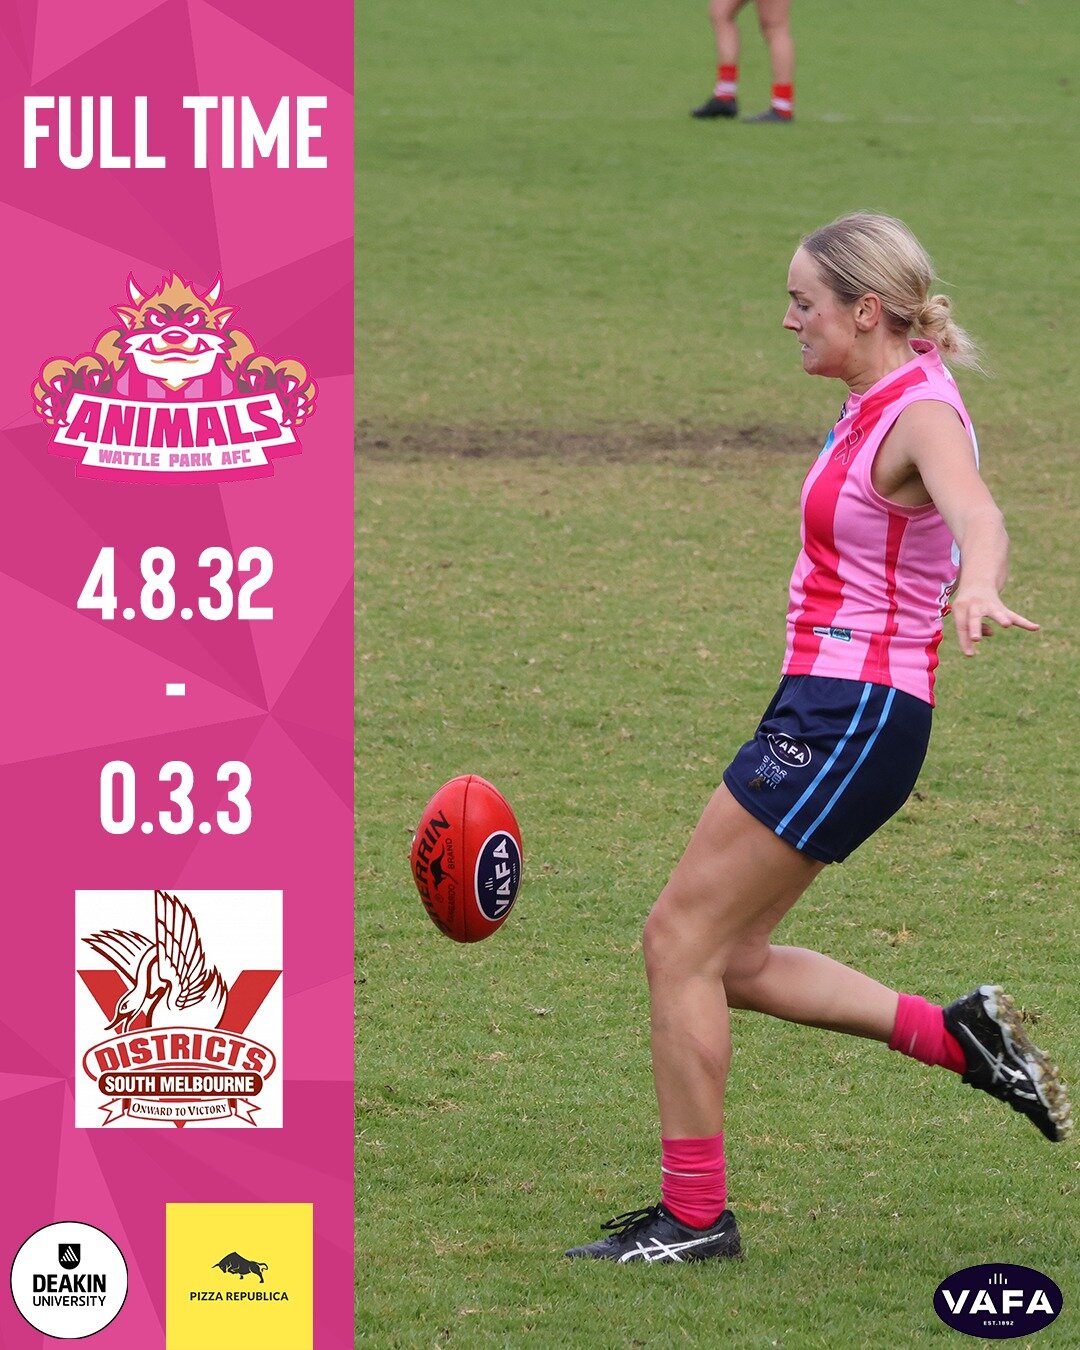 WOMEN

Two in a row, and the first ever win in pink for the Women

#WPvSMD #AnimalsFooty